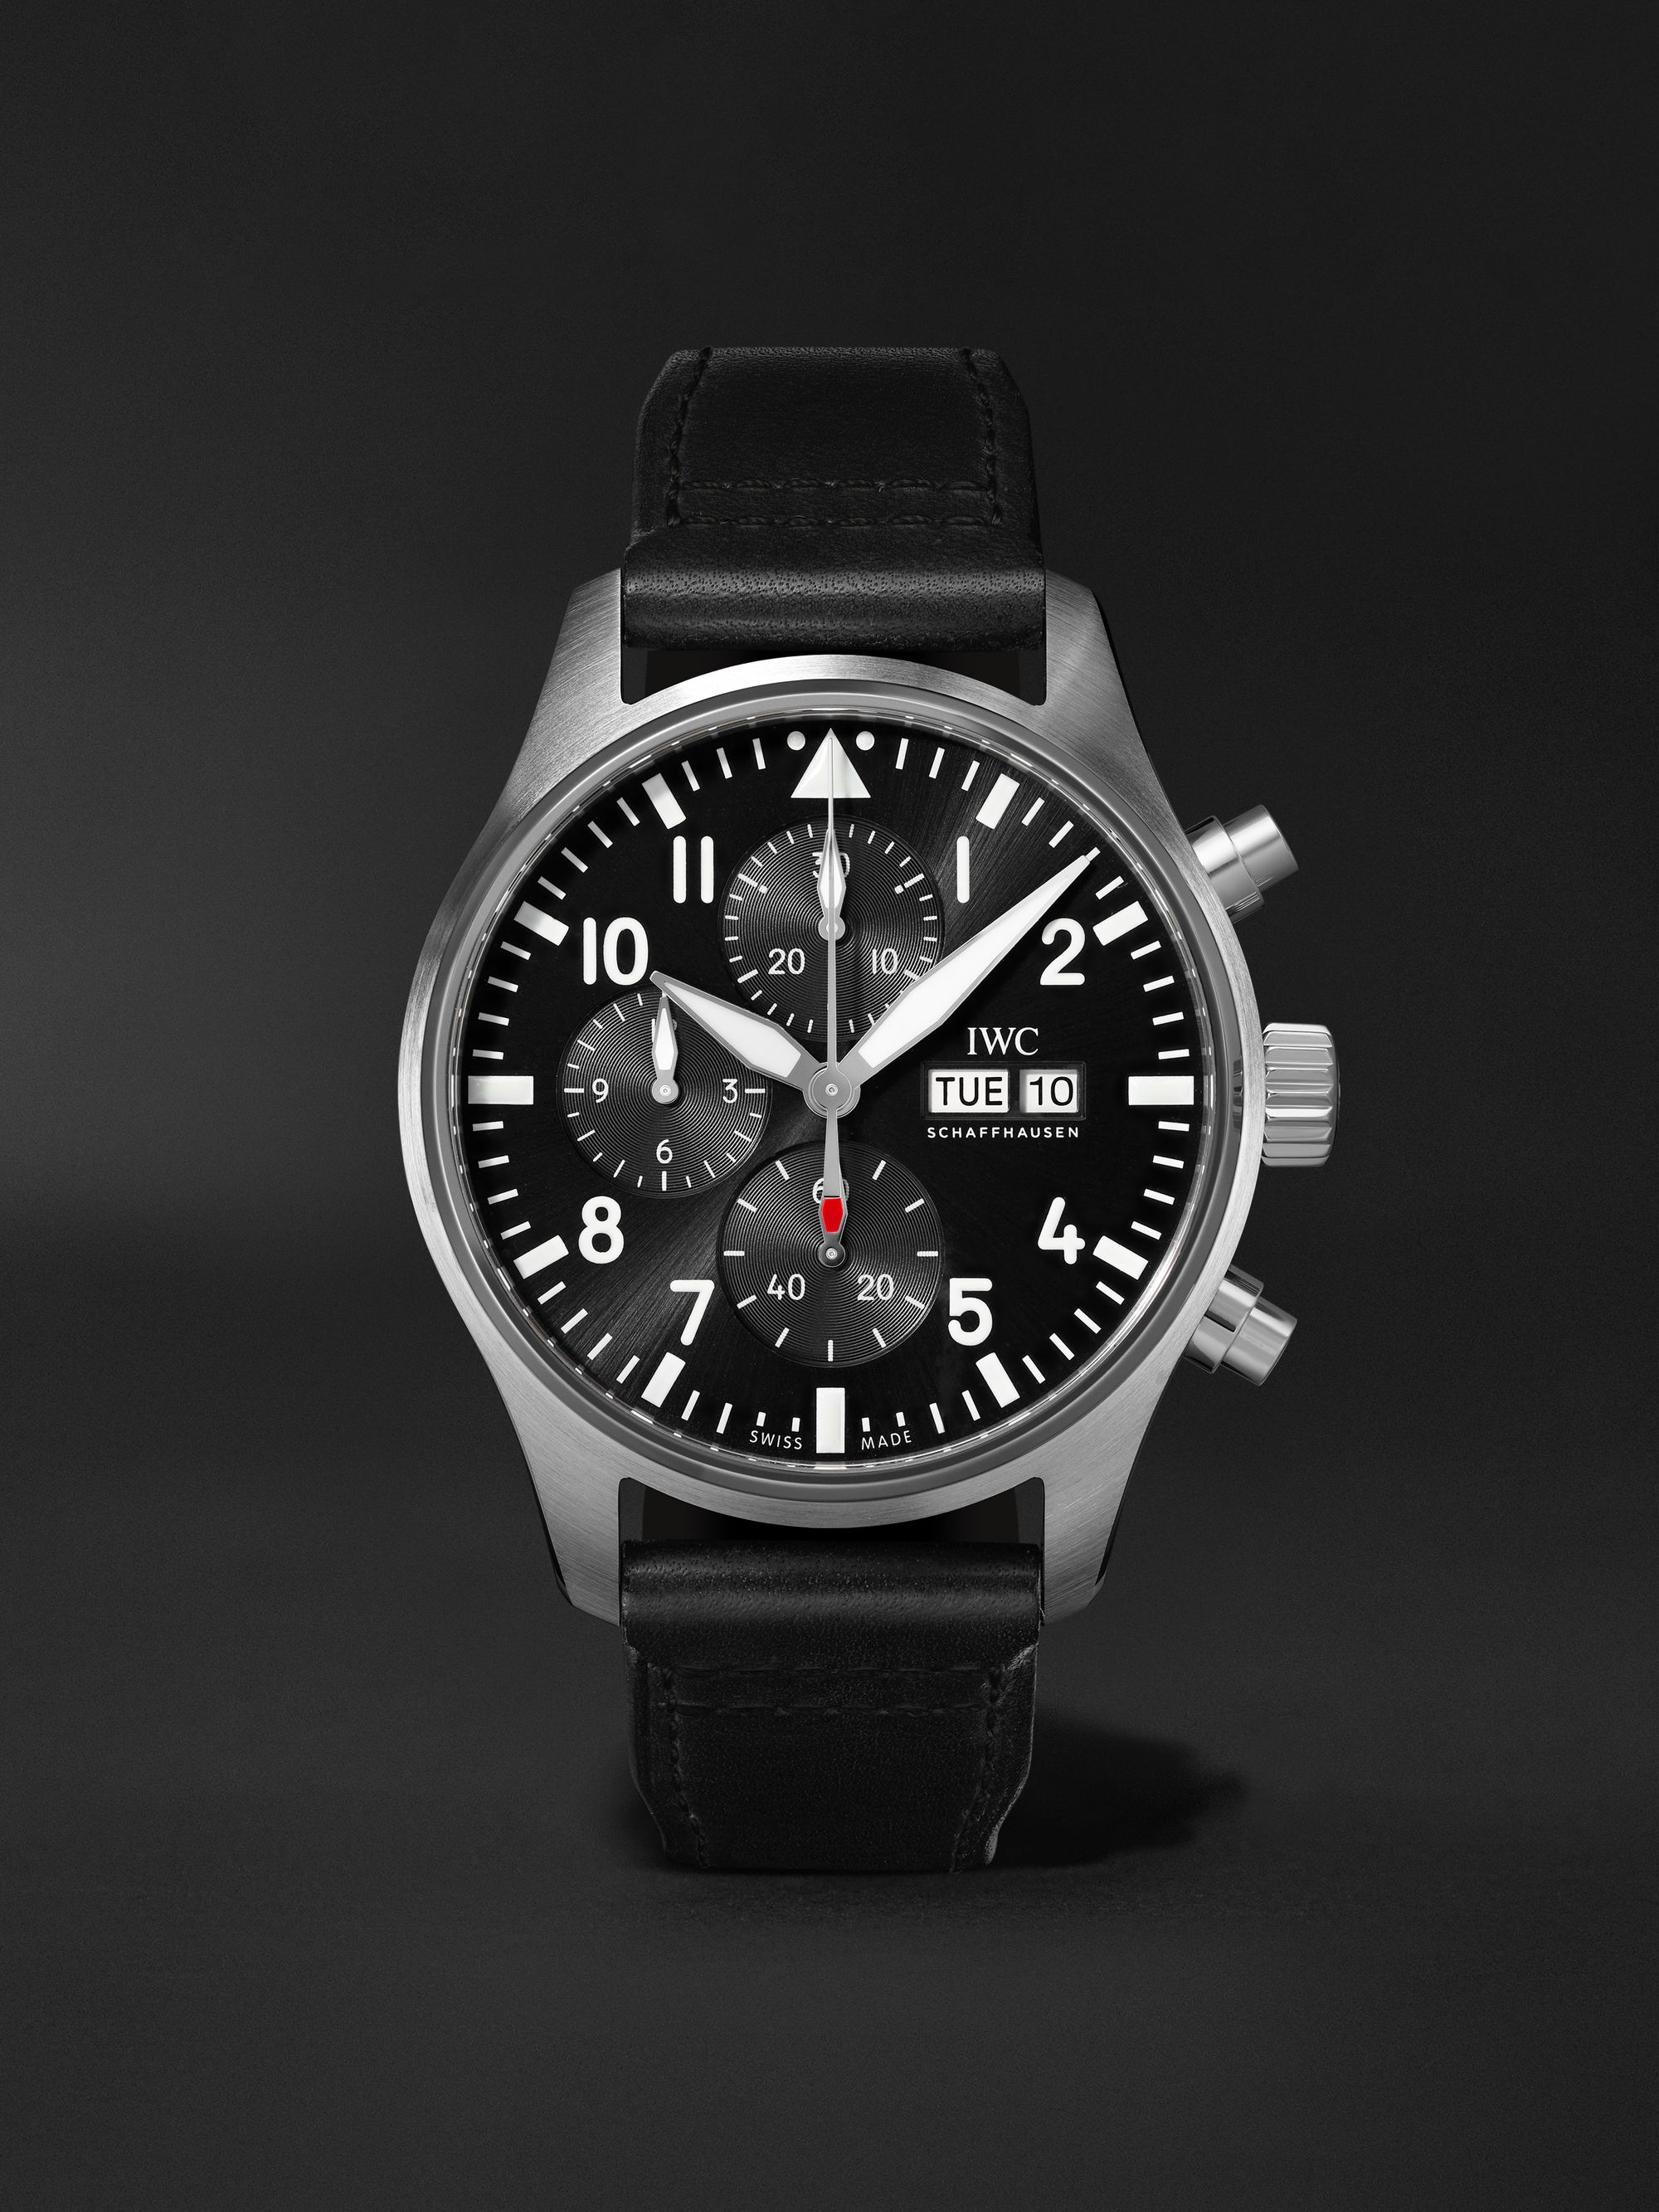 IWC SCHAFFHAUSEN Pilot's Automatic Chronograph 43mm Stainless Steel and Leather Watch, Ref. No. IWIW378001